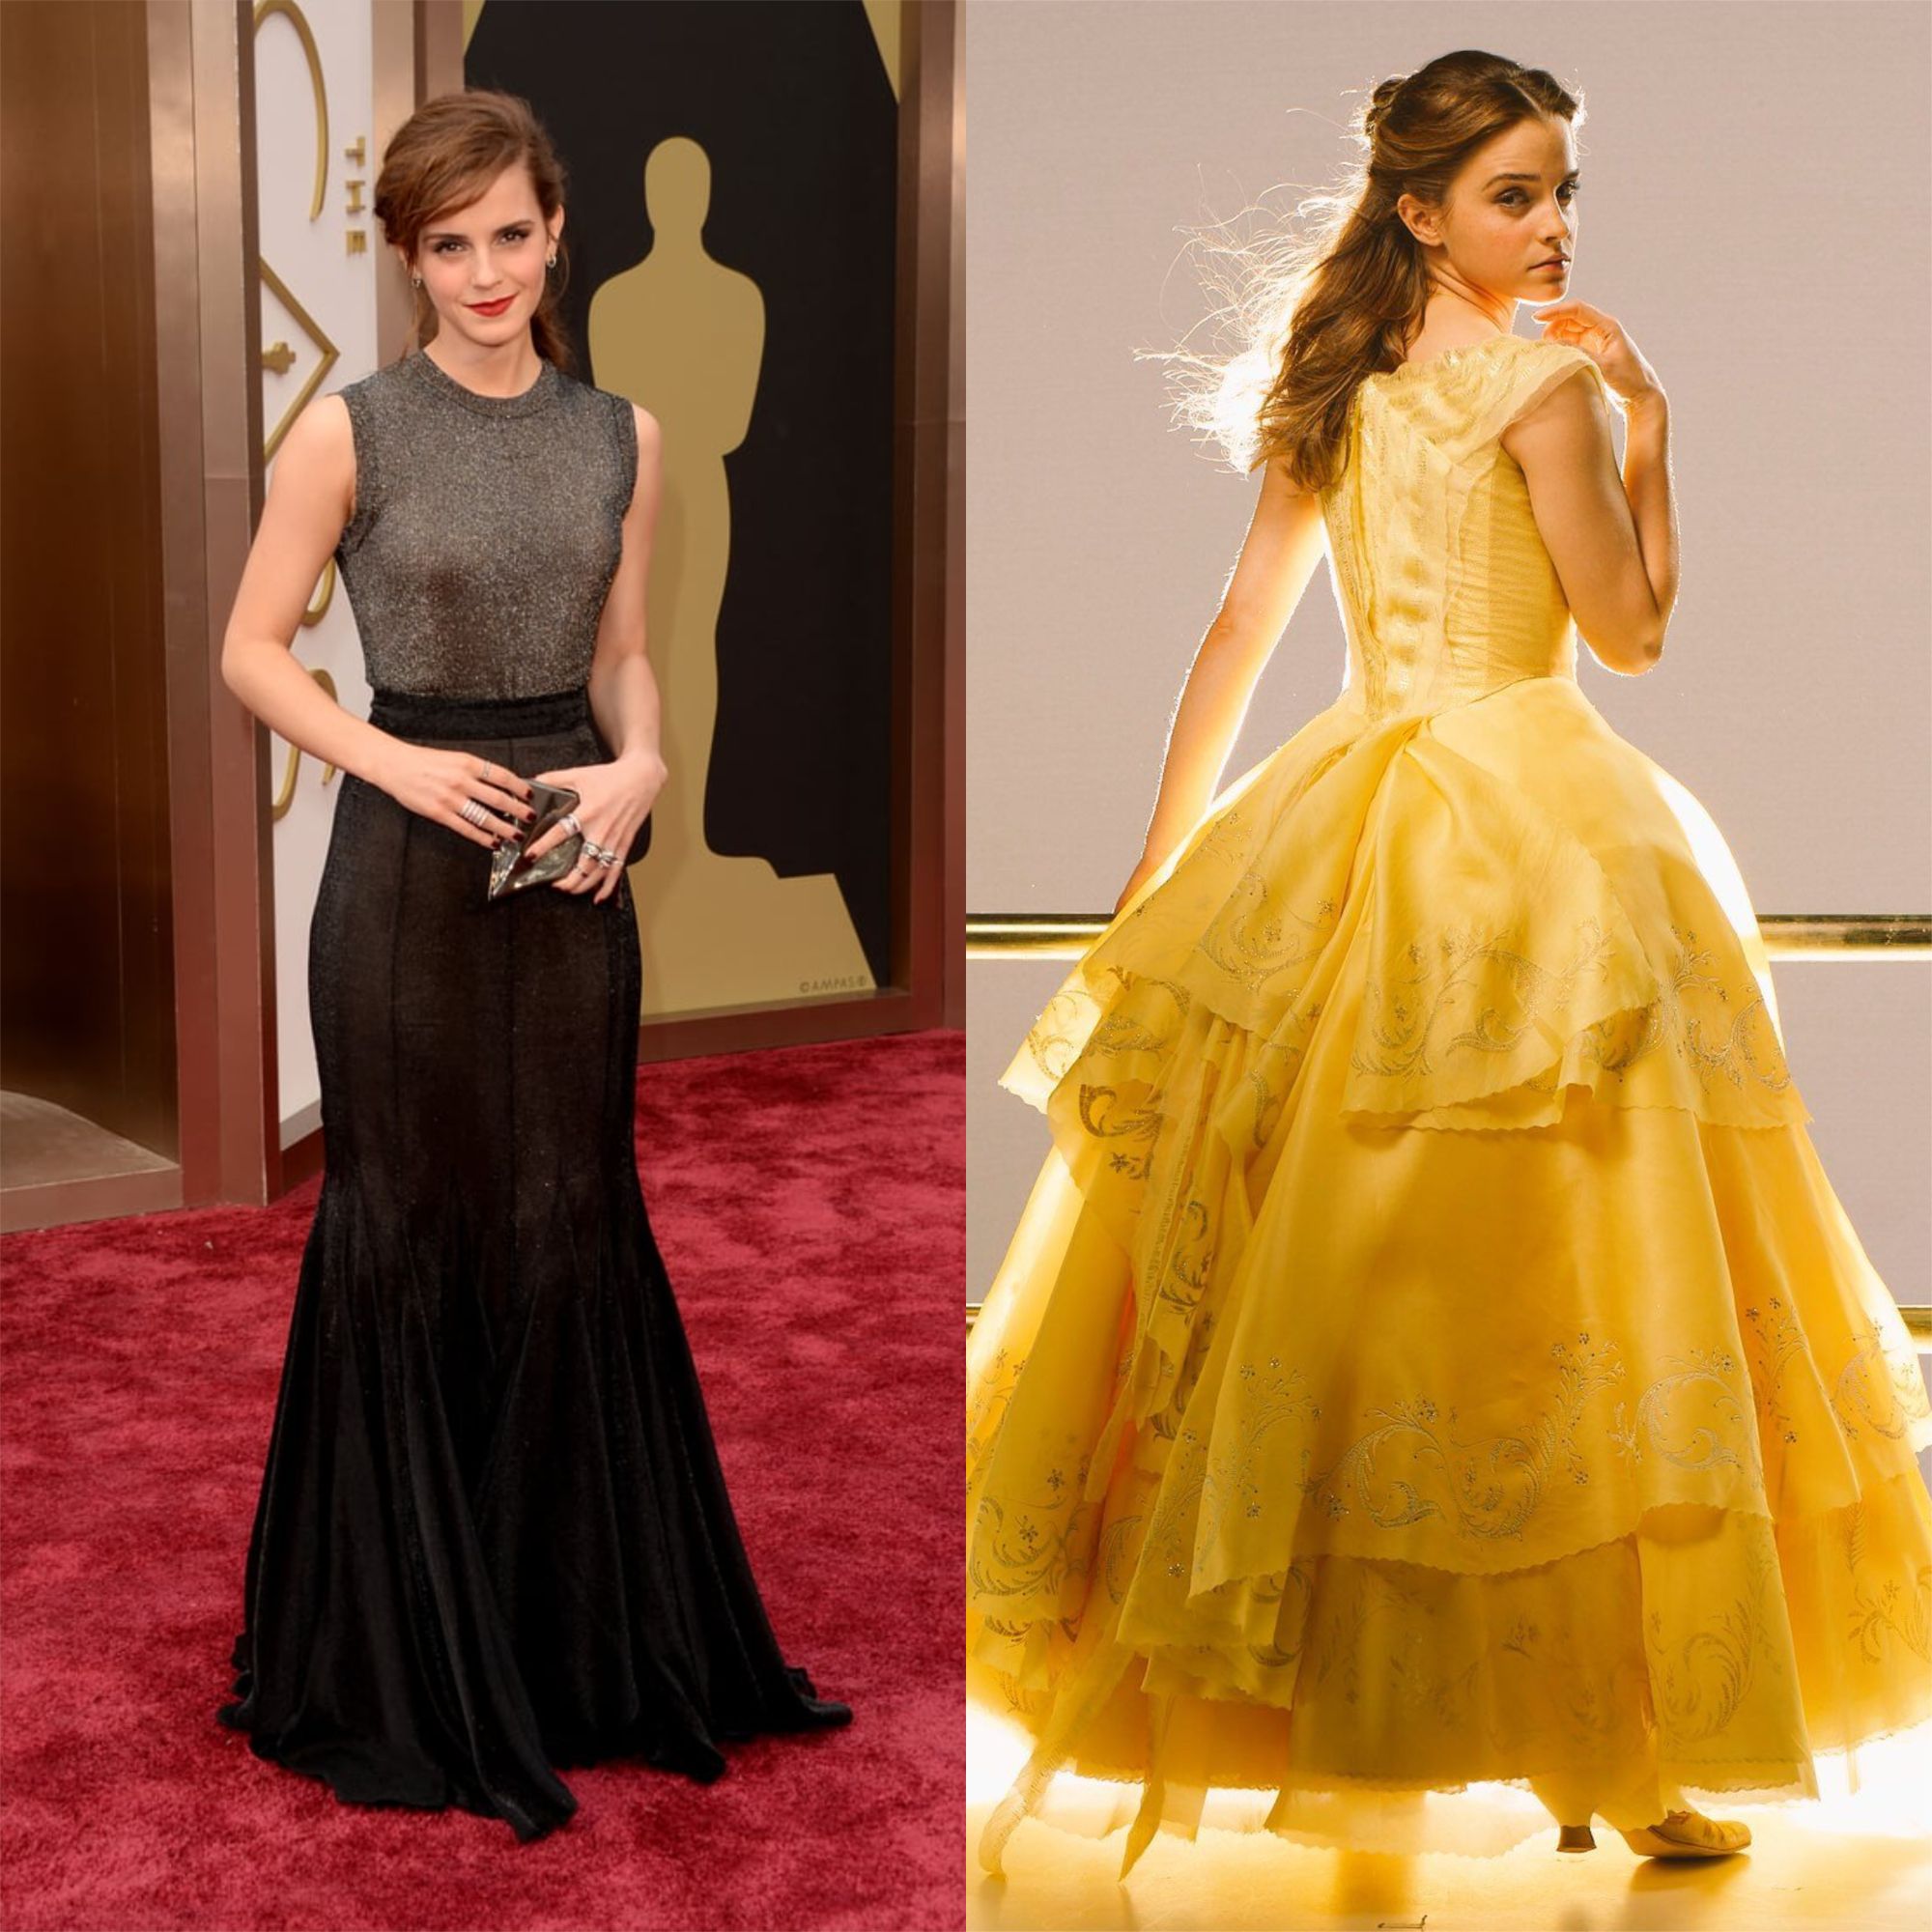 The Original Style of Hollywood Celebs Who Have Played Disney Princess Characters